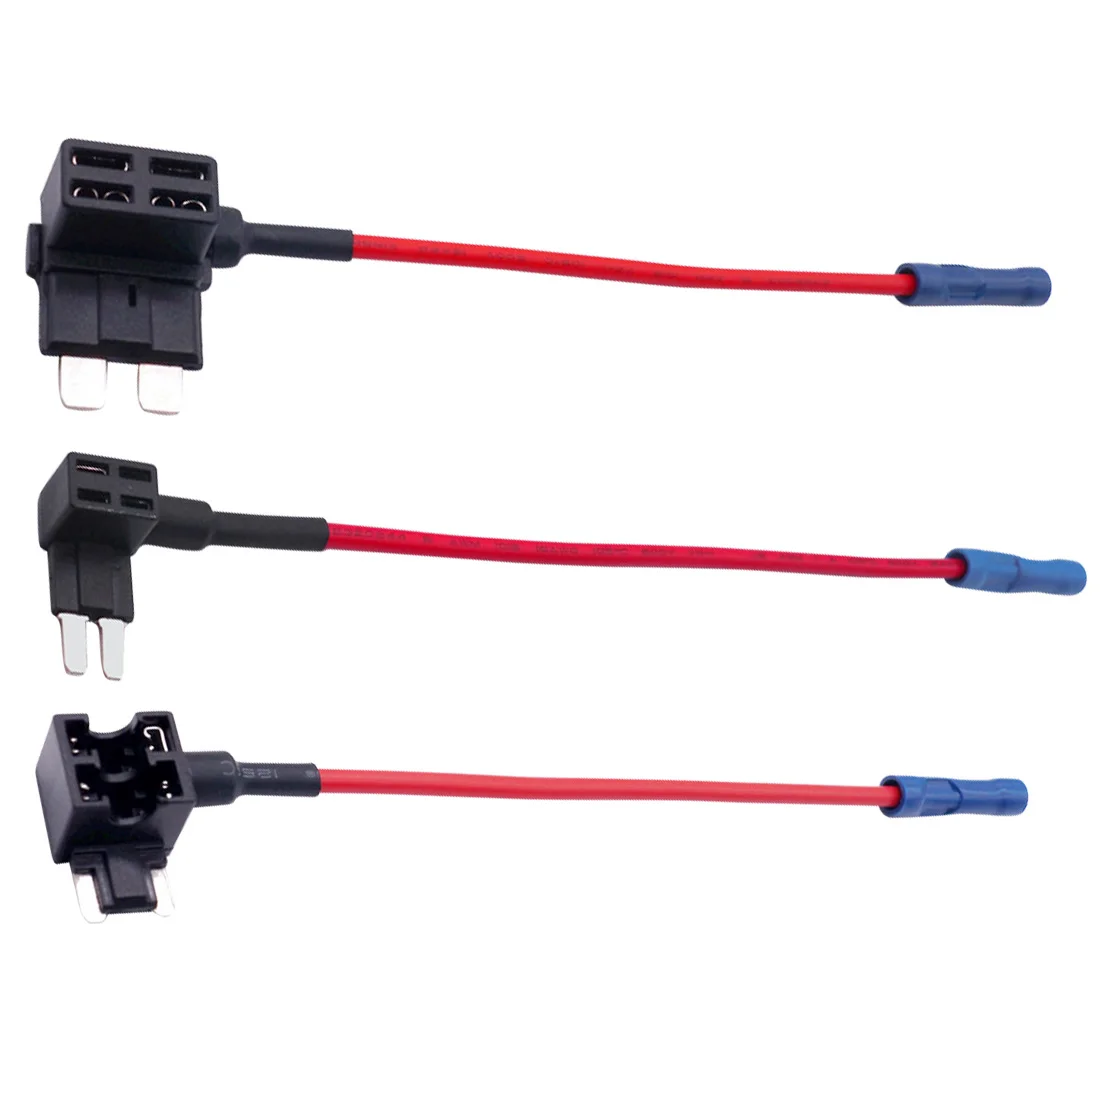 

Hot Sale 12V Size Car Fuse Holder Add-a-circuit Piggy Back Fuse Tap Adapter with 10A Micro Mini Standard ATM Blade Fuse